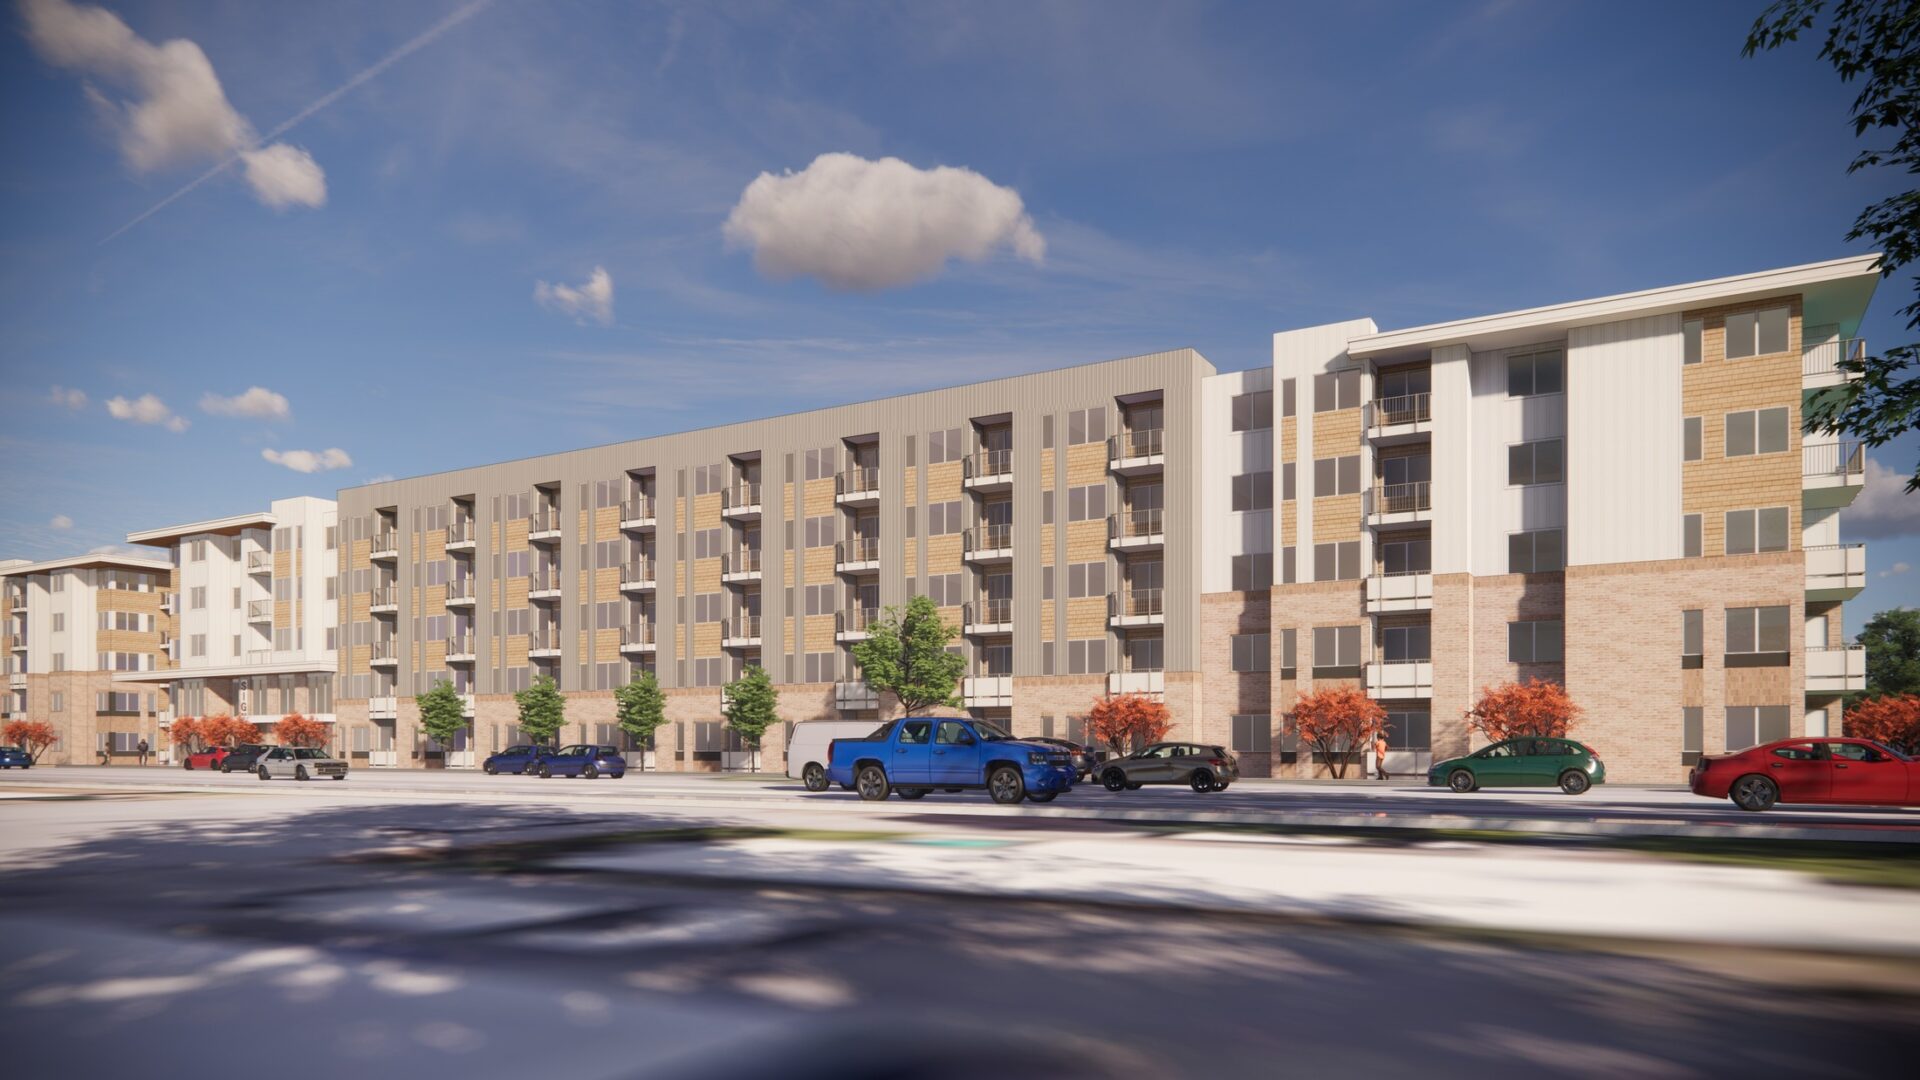 252 New Affordable Housing Units Coming to Reno